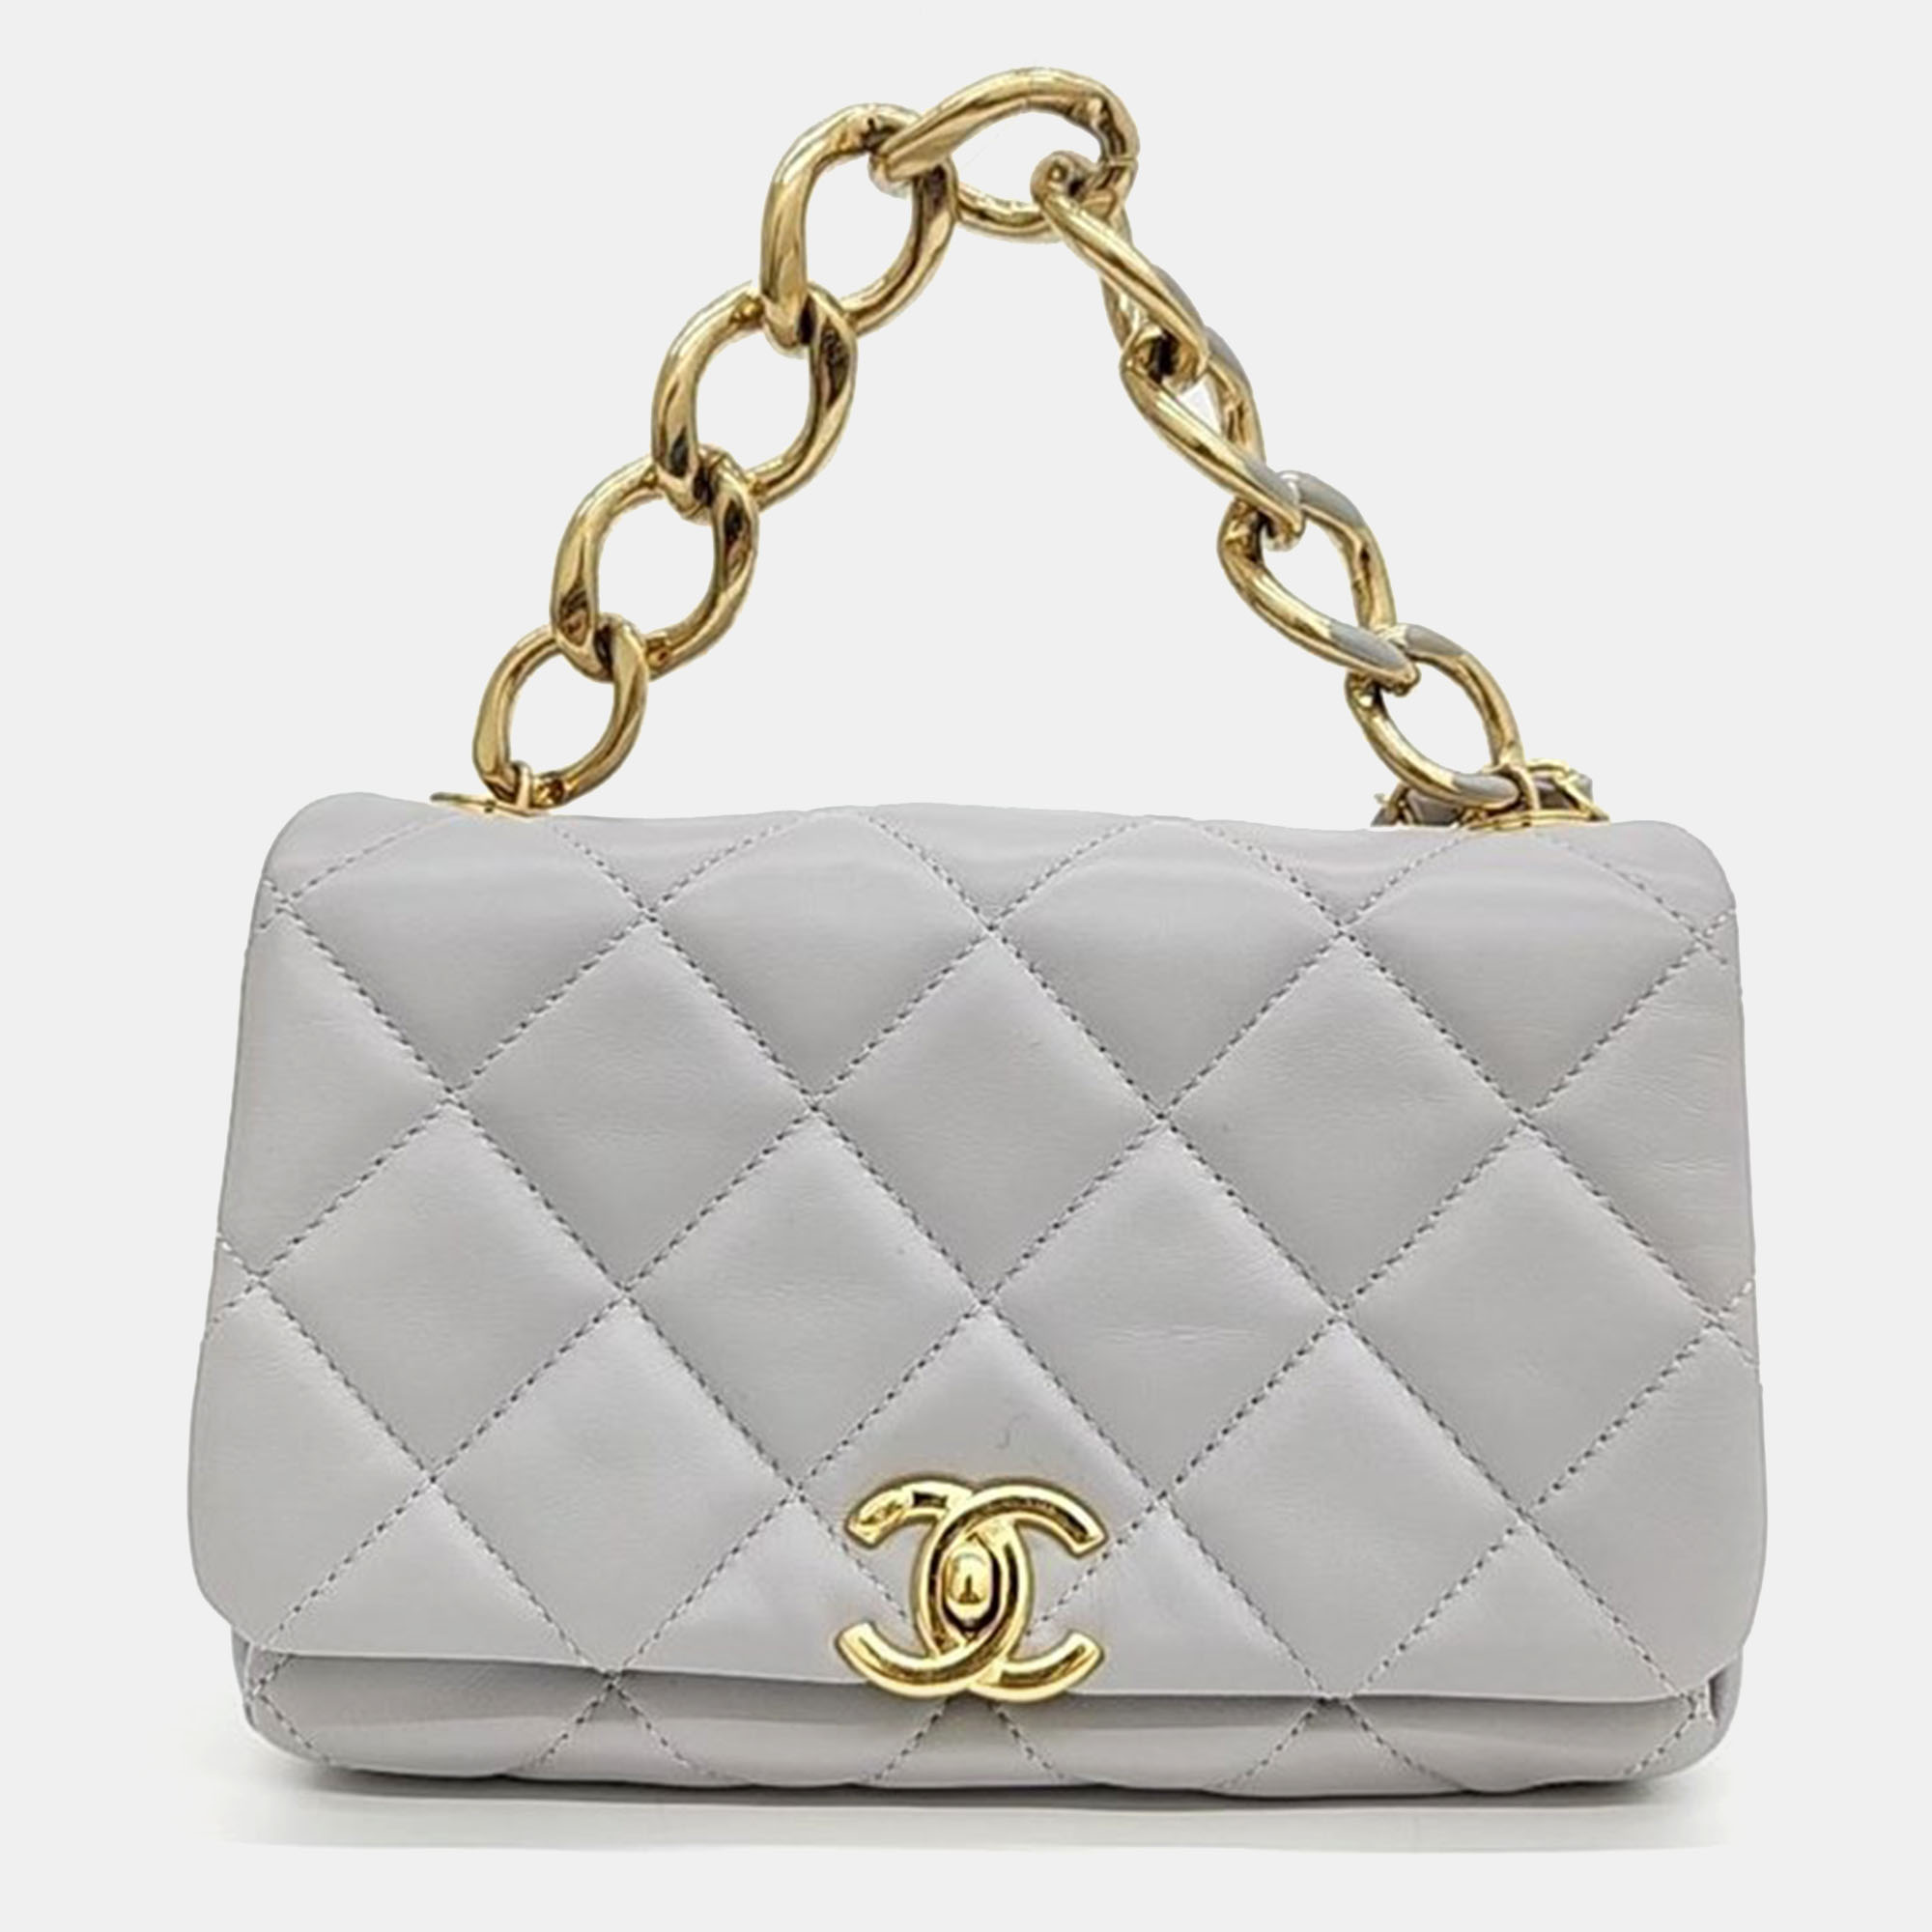 Chanel flap chain tote and shoulder bag